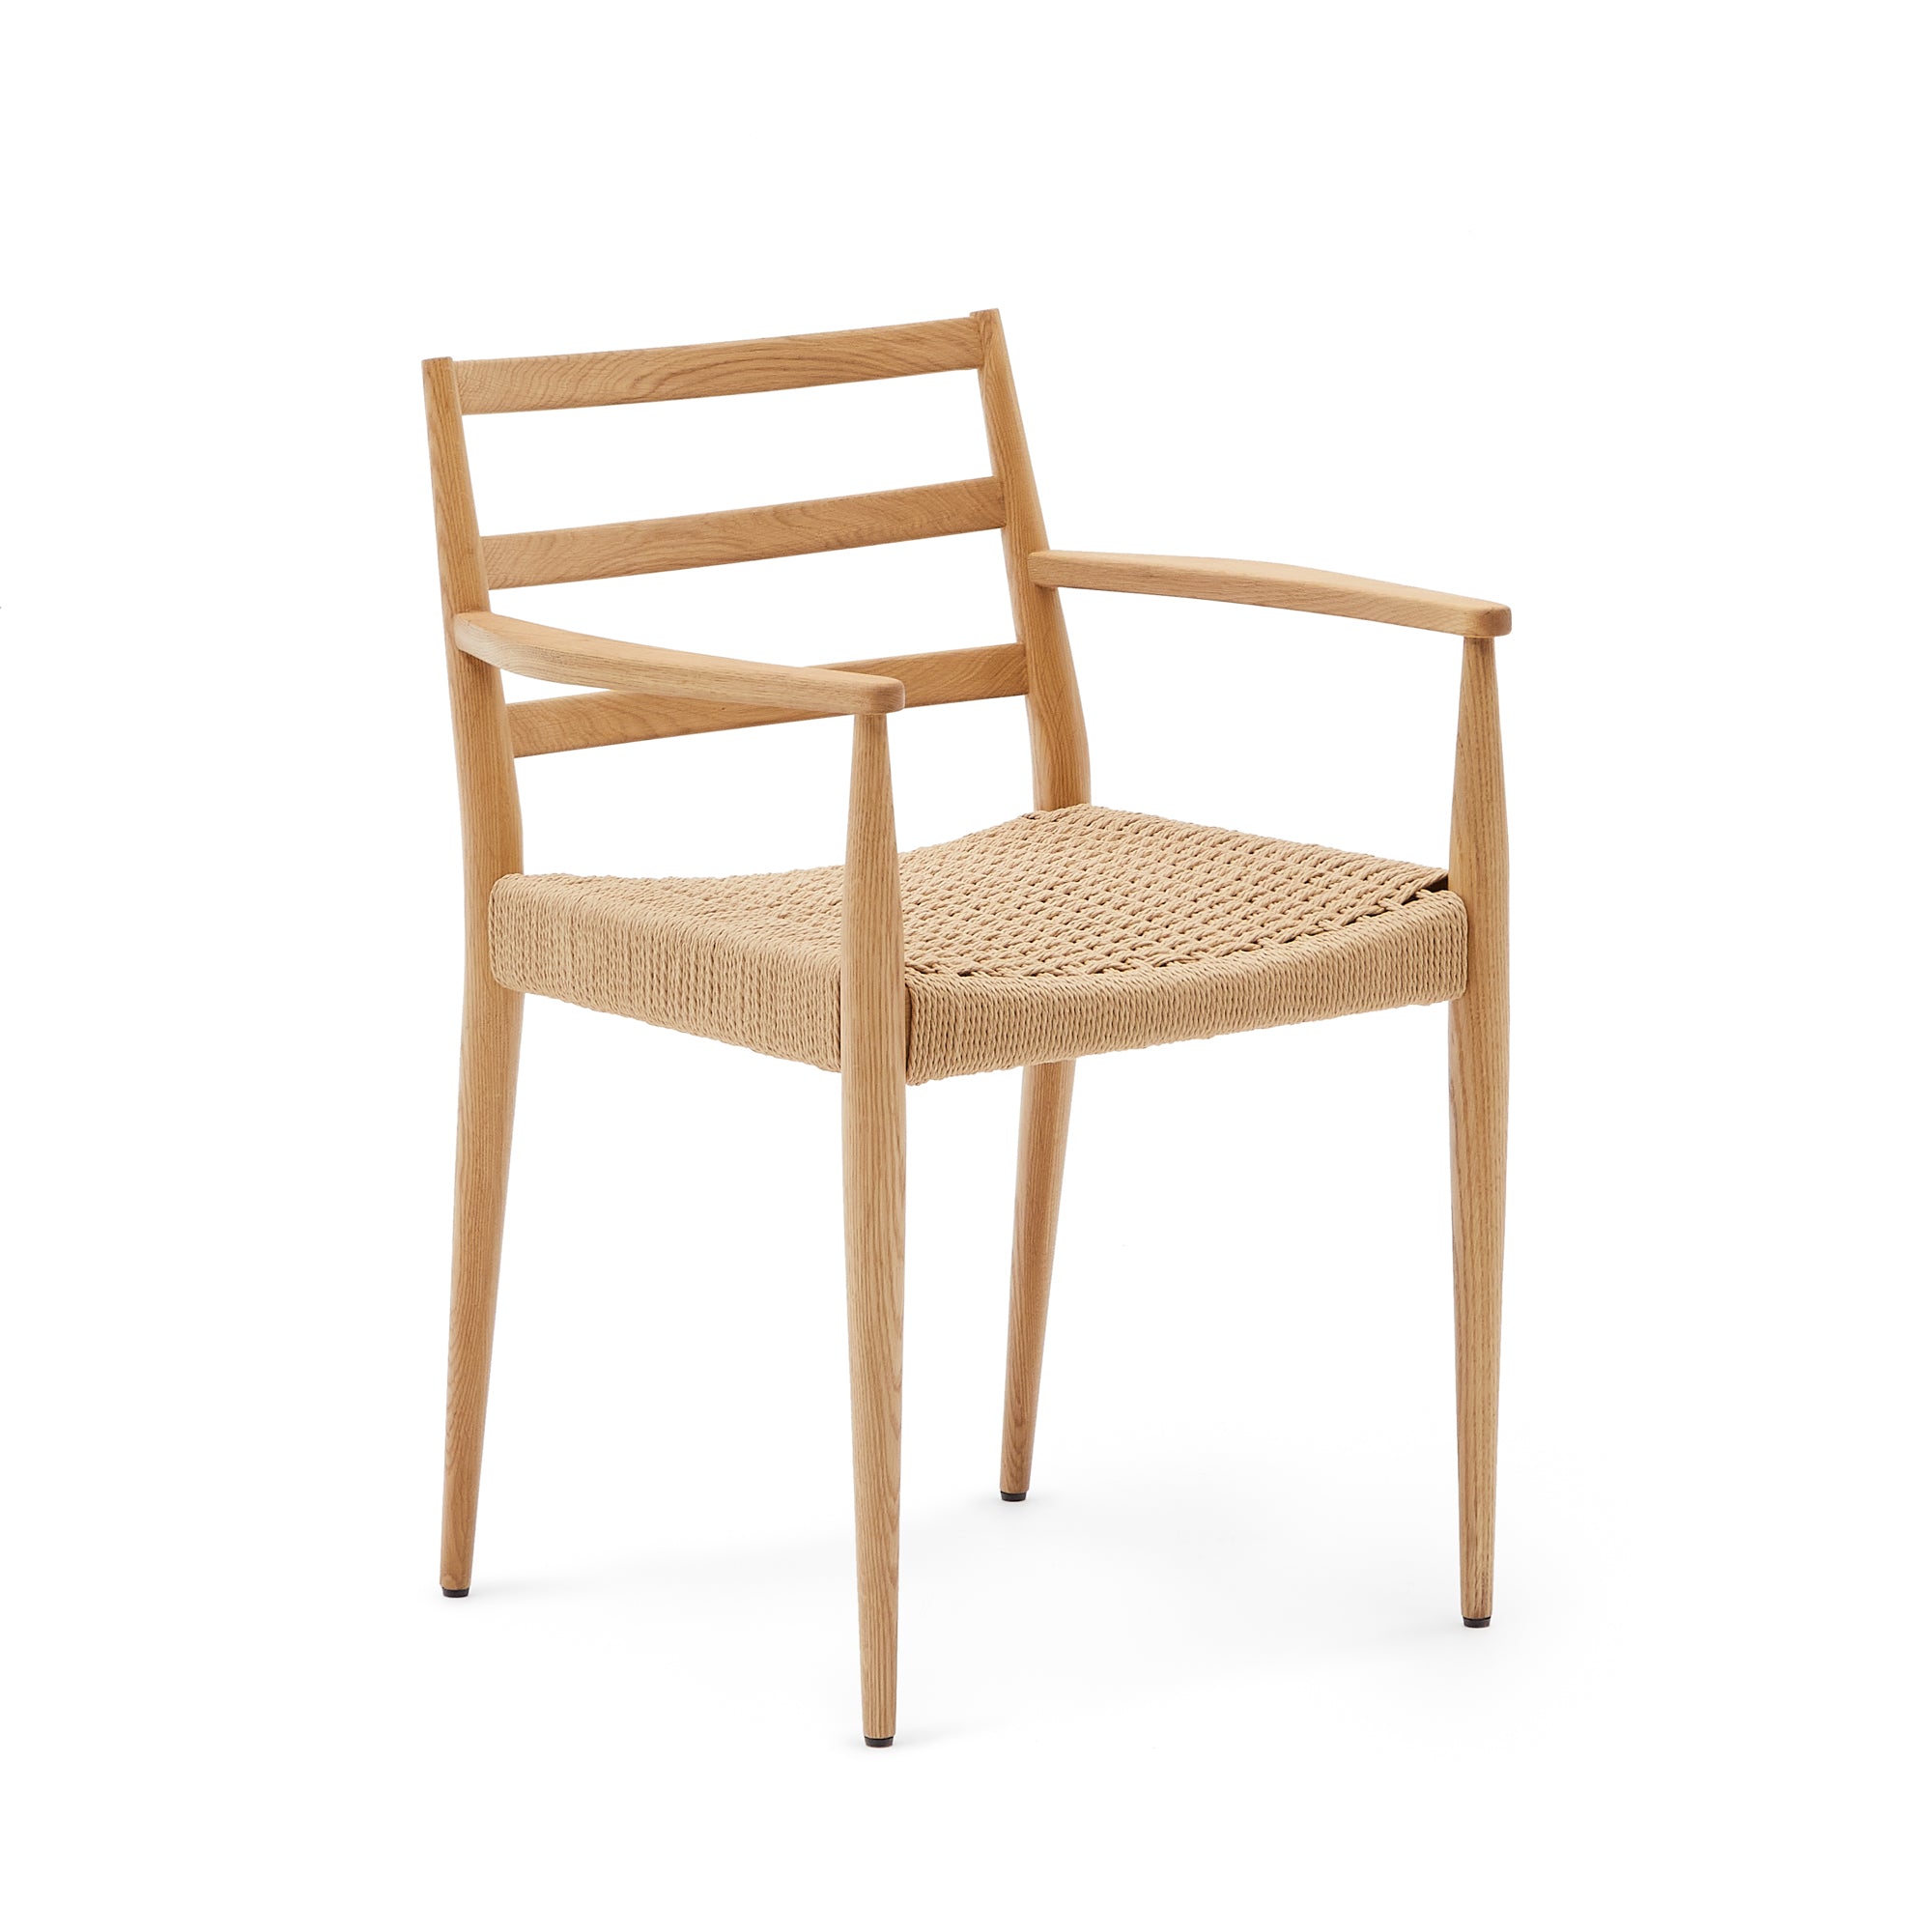 Analy chair with armrests, solid oak, 100% FSC natural finish and rope seat